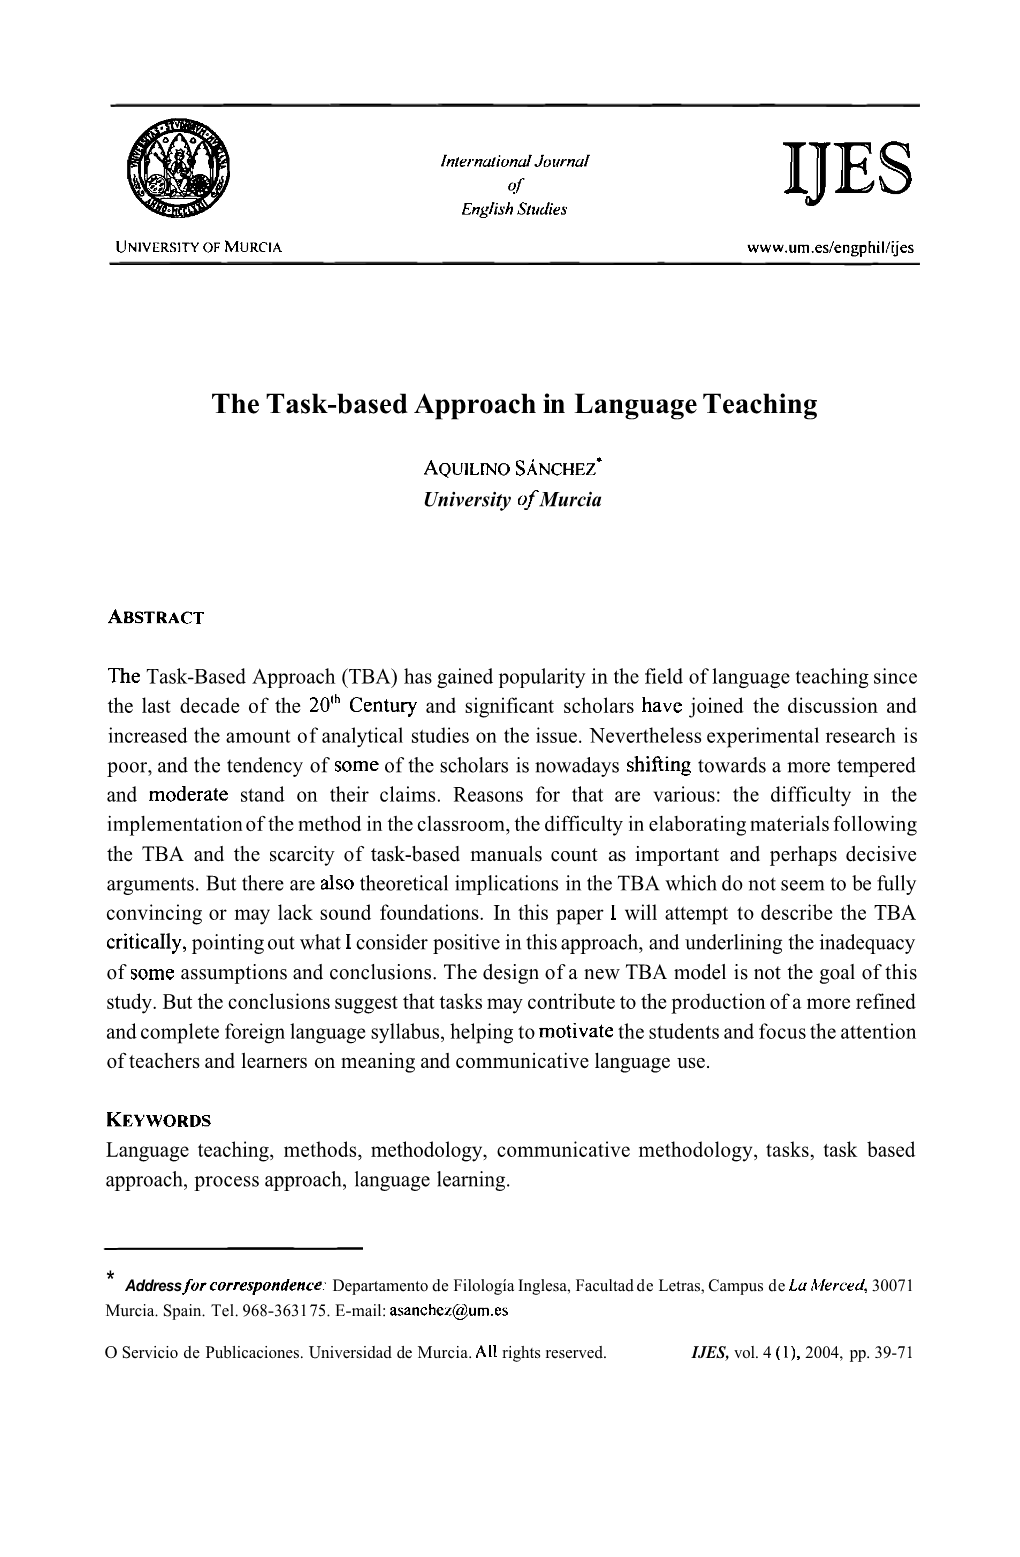 The Task-Based Approach in Language Teaching